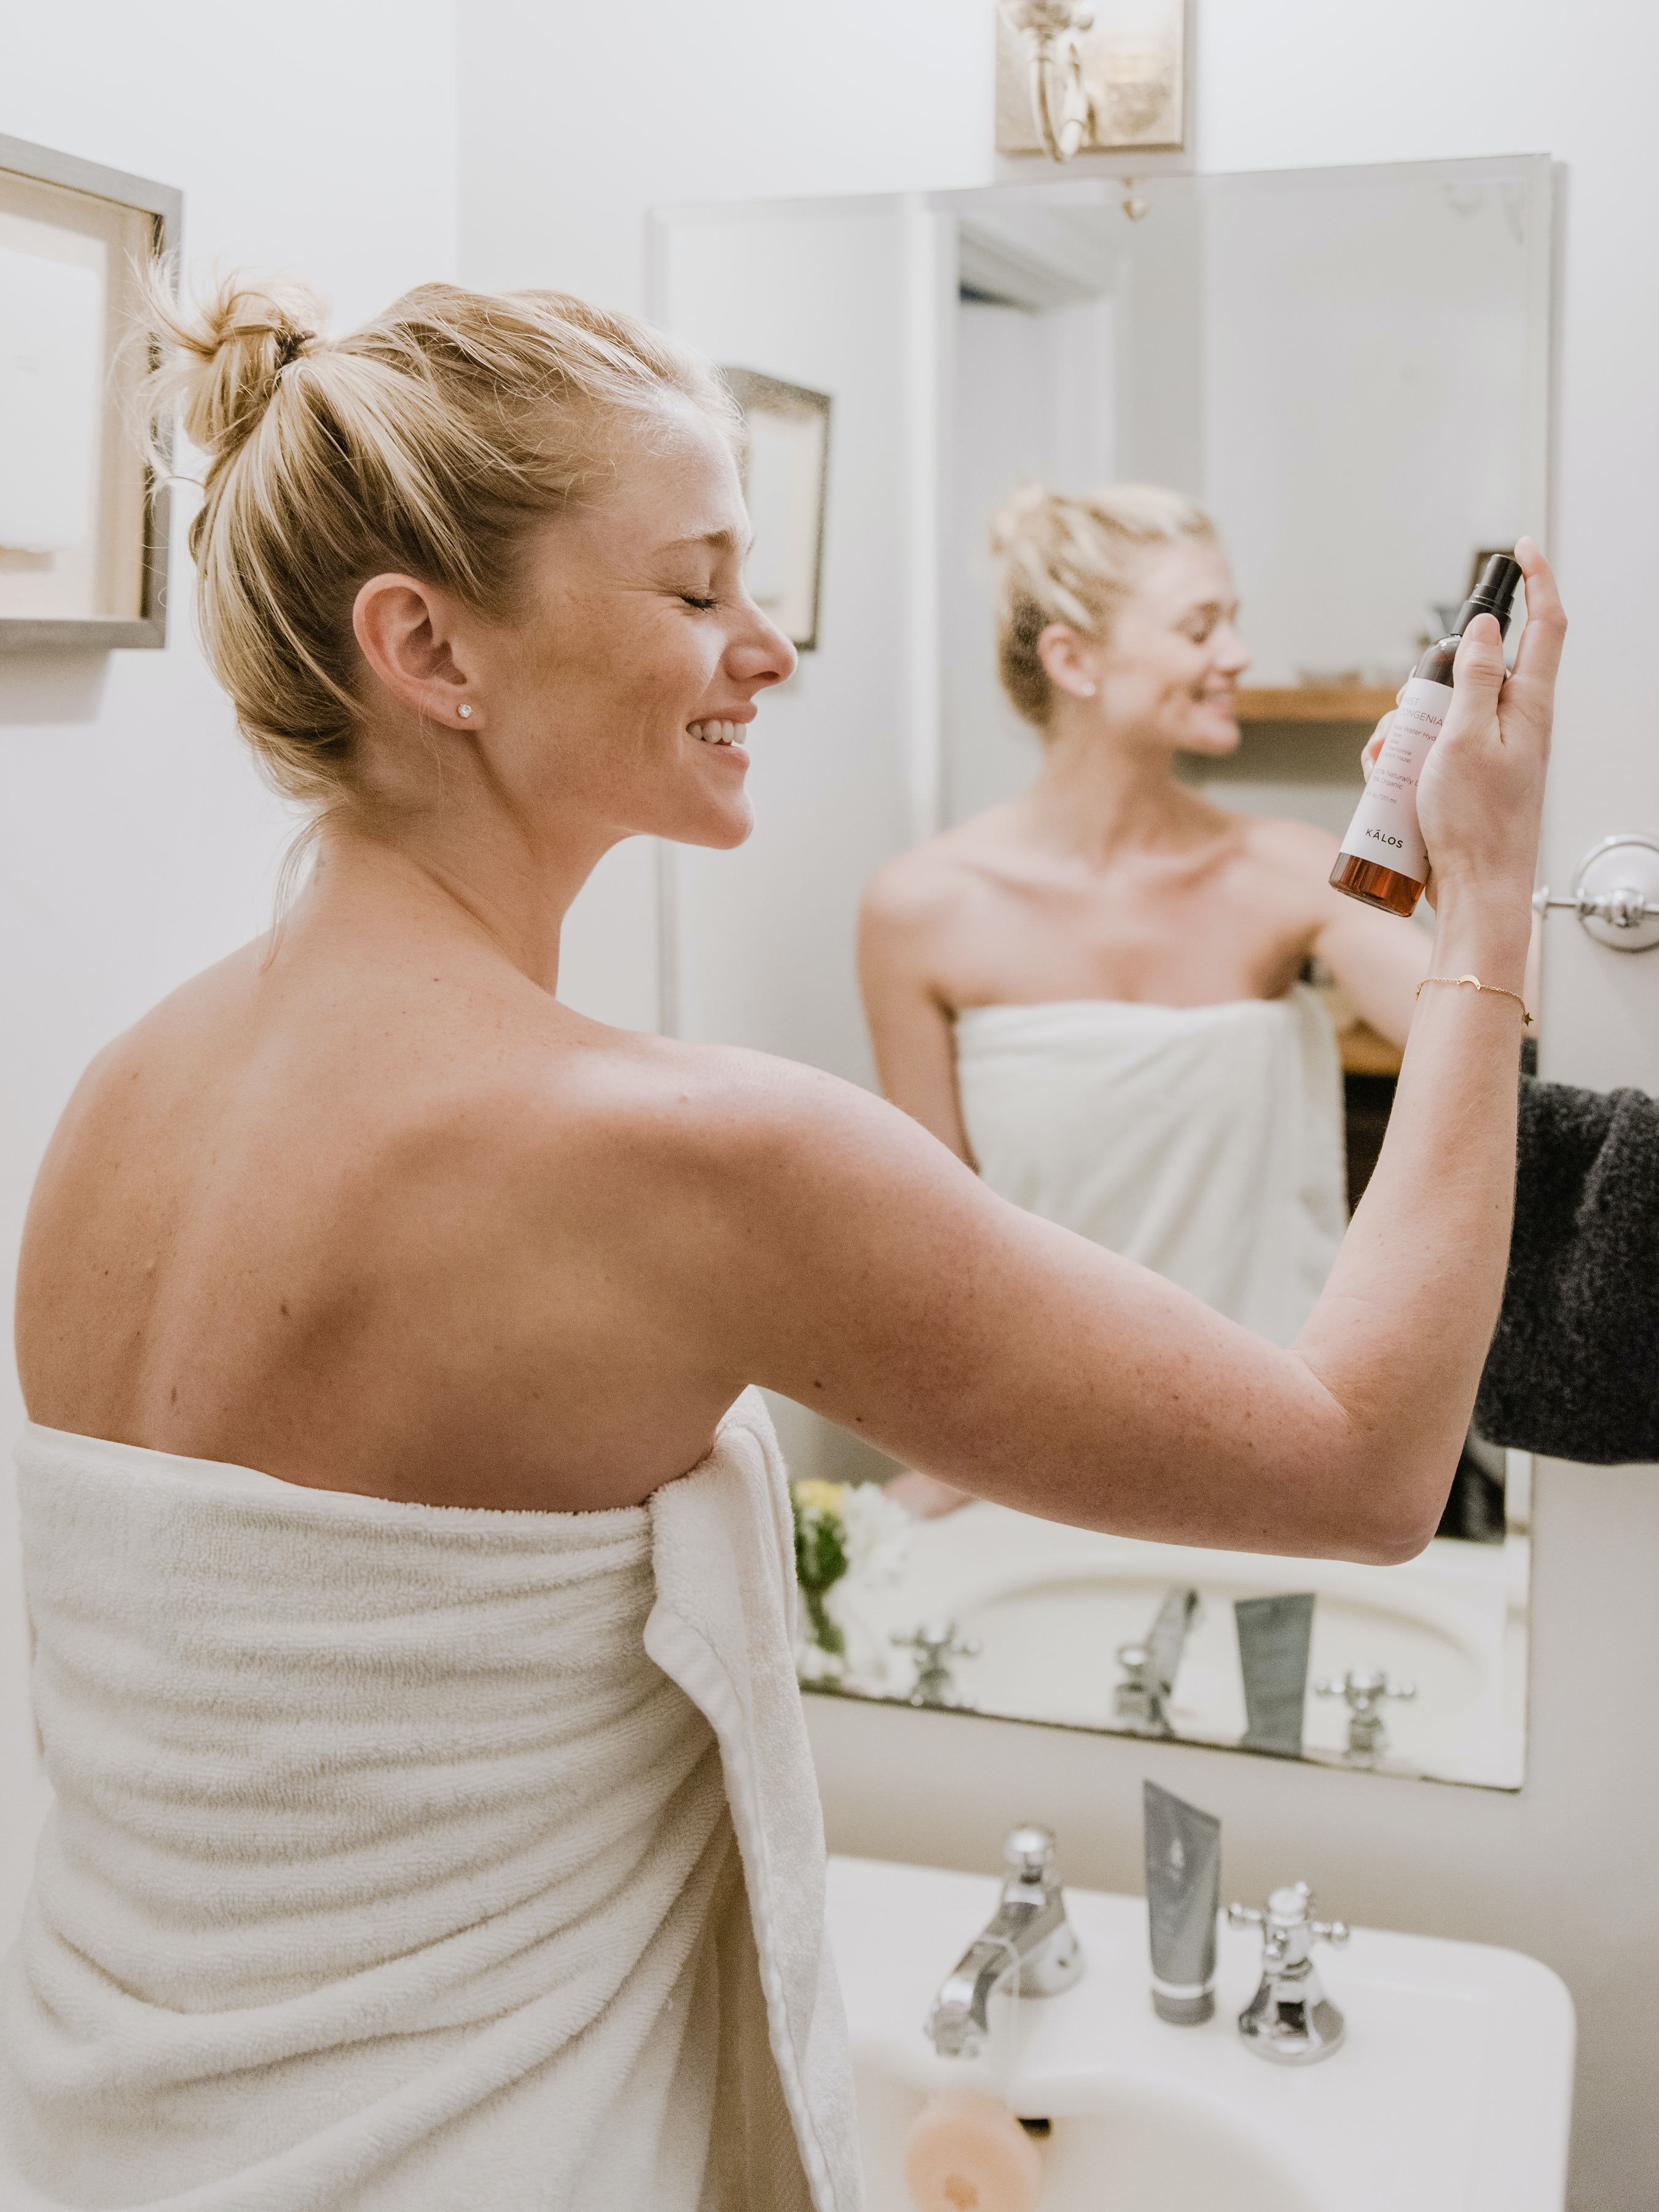 Spend time on yourself first, Blonde woman with hair in bun in bathroom spraying face with beauty product taking time for self care, start saying no